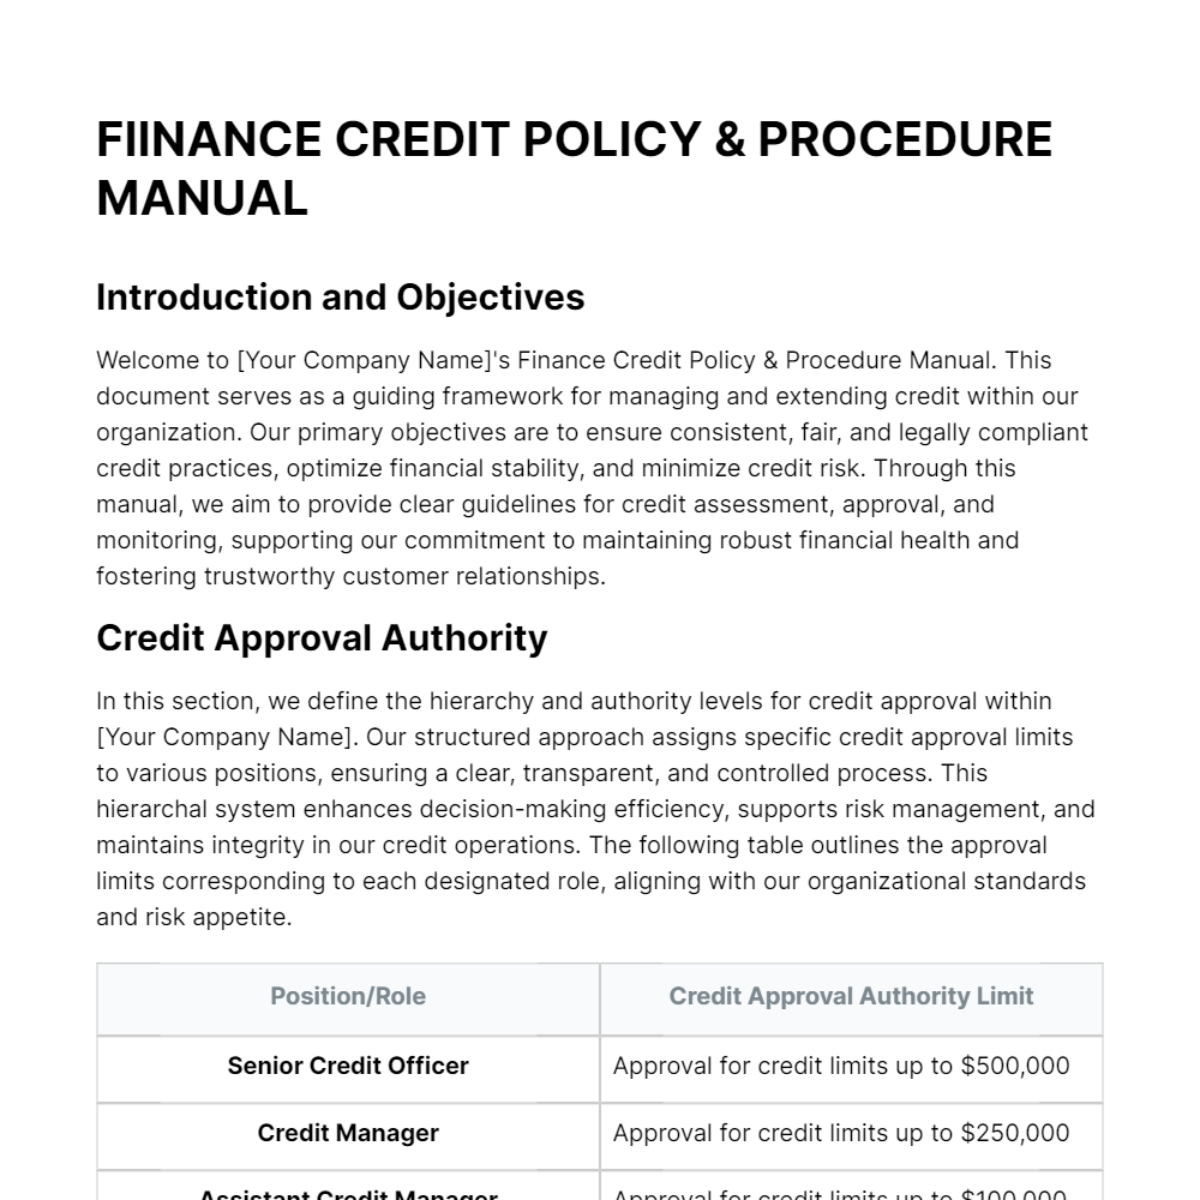 Finance Credit Policy & Procedure Manual Template